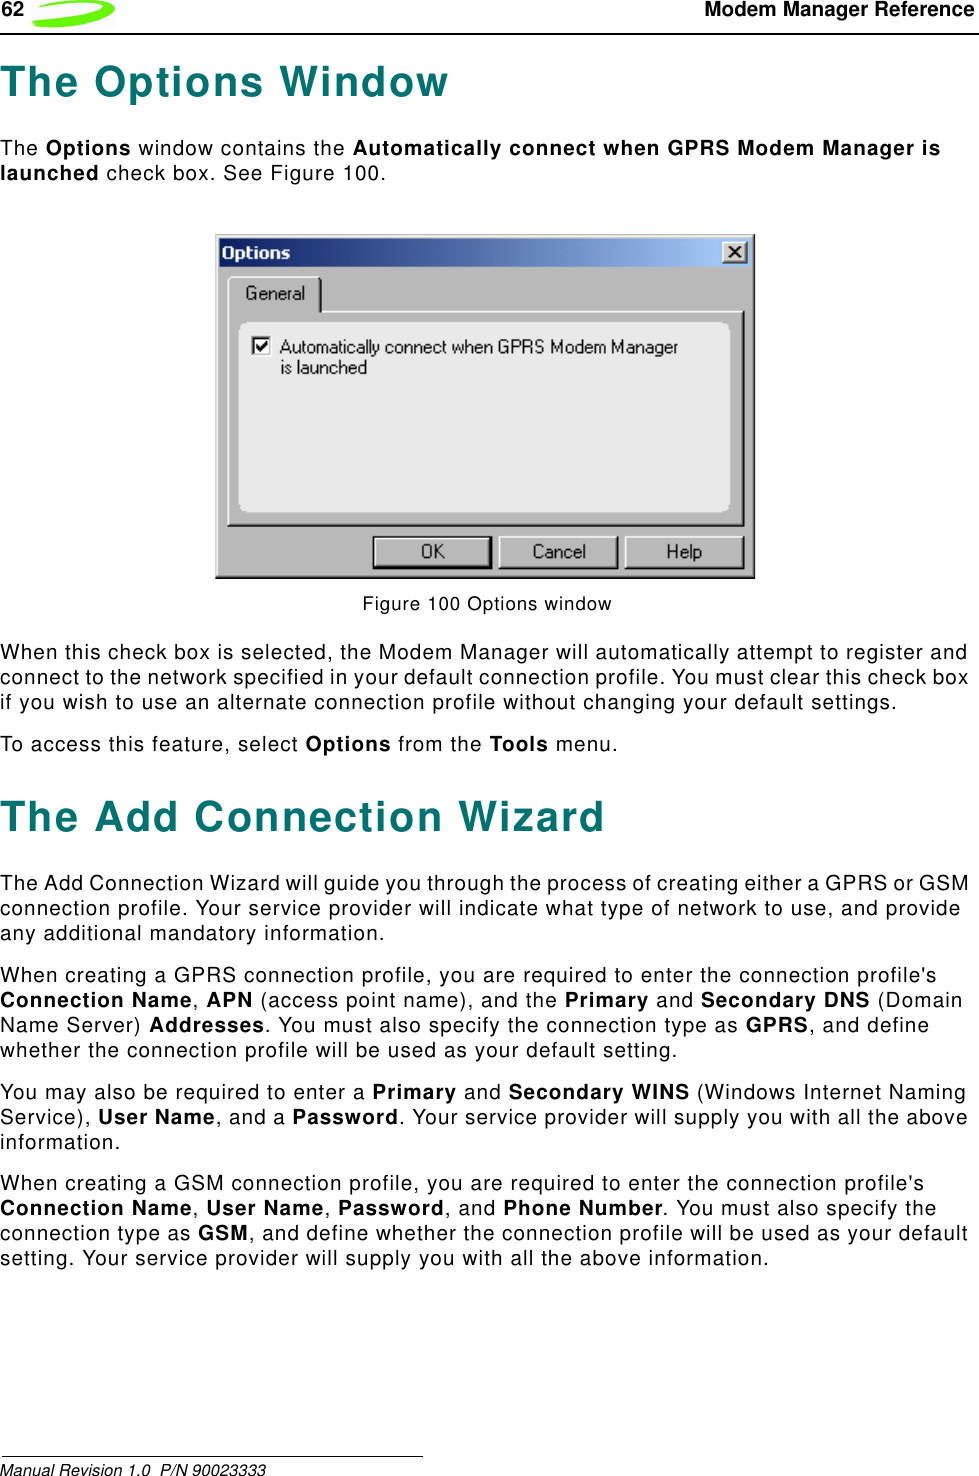 62  Modem Manager ReferenceManual Revision 1.0  P/N 90023333 The Options WindowThe Options window contains the Automatically connect when GPRS Modem Manager is launched check box. See Figure 100.Figure 100 Options windowWhen this check box is selected, the Modem Manager will automatically attempt to register and connect to the network specified in your default connection profile. You must clear this check box if you wish to use an alternate connection profile without changing your default settings.To access this feature, select Options from the Tools menu.The Add Connection WizardThe Add Connection Wizard will guide you through the process of creating either a GPRS or GSM connection profile. Your service provider will indicate what type of network to use, and provide any additional mandatory information. When creating a GPRS connection profile, you are required to enter the connection profile&apos;s Connection Name, APN (access point name), and the Primary and Secondary DNS (Domain Name Server) Addresses. You must also specify the connection type as GPRS, and define whether the connection profile will be used as your default setting.You may also be required to enter a Primary and Secondary WINS (Windows Internet Naming Service), User Name, and a Password. Your service provider will supply you with all the above information.When creating a GSM connection profile, you are required to enter the connection profile&apos;s Connection Name, User Name, Password, and Phone Number. You must also specify the connection type as GSM, and define whether the connection profile will be used as your default setting. Your service provider will supply you with all the above information.